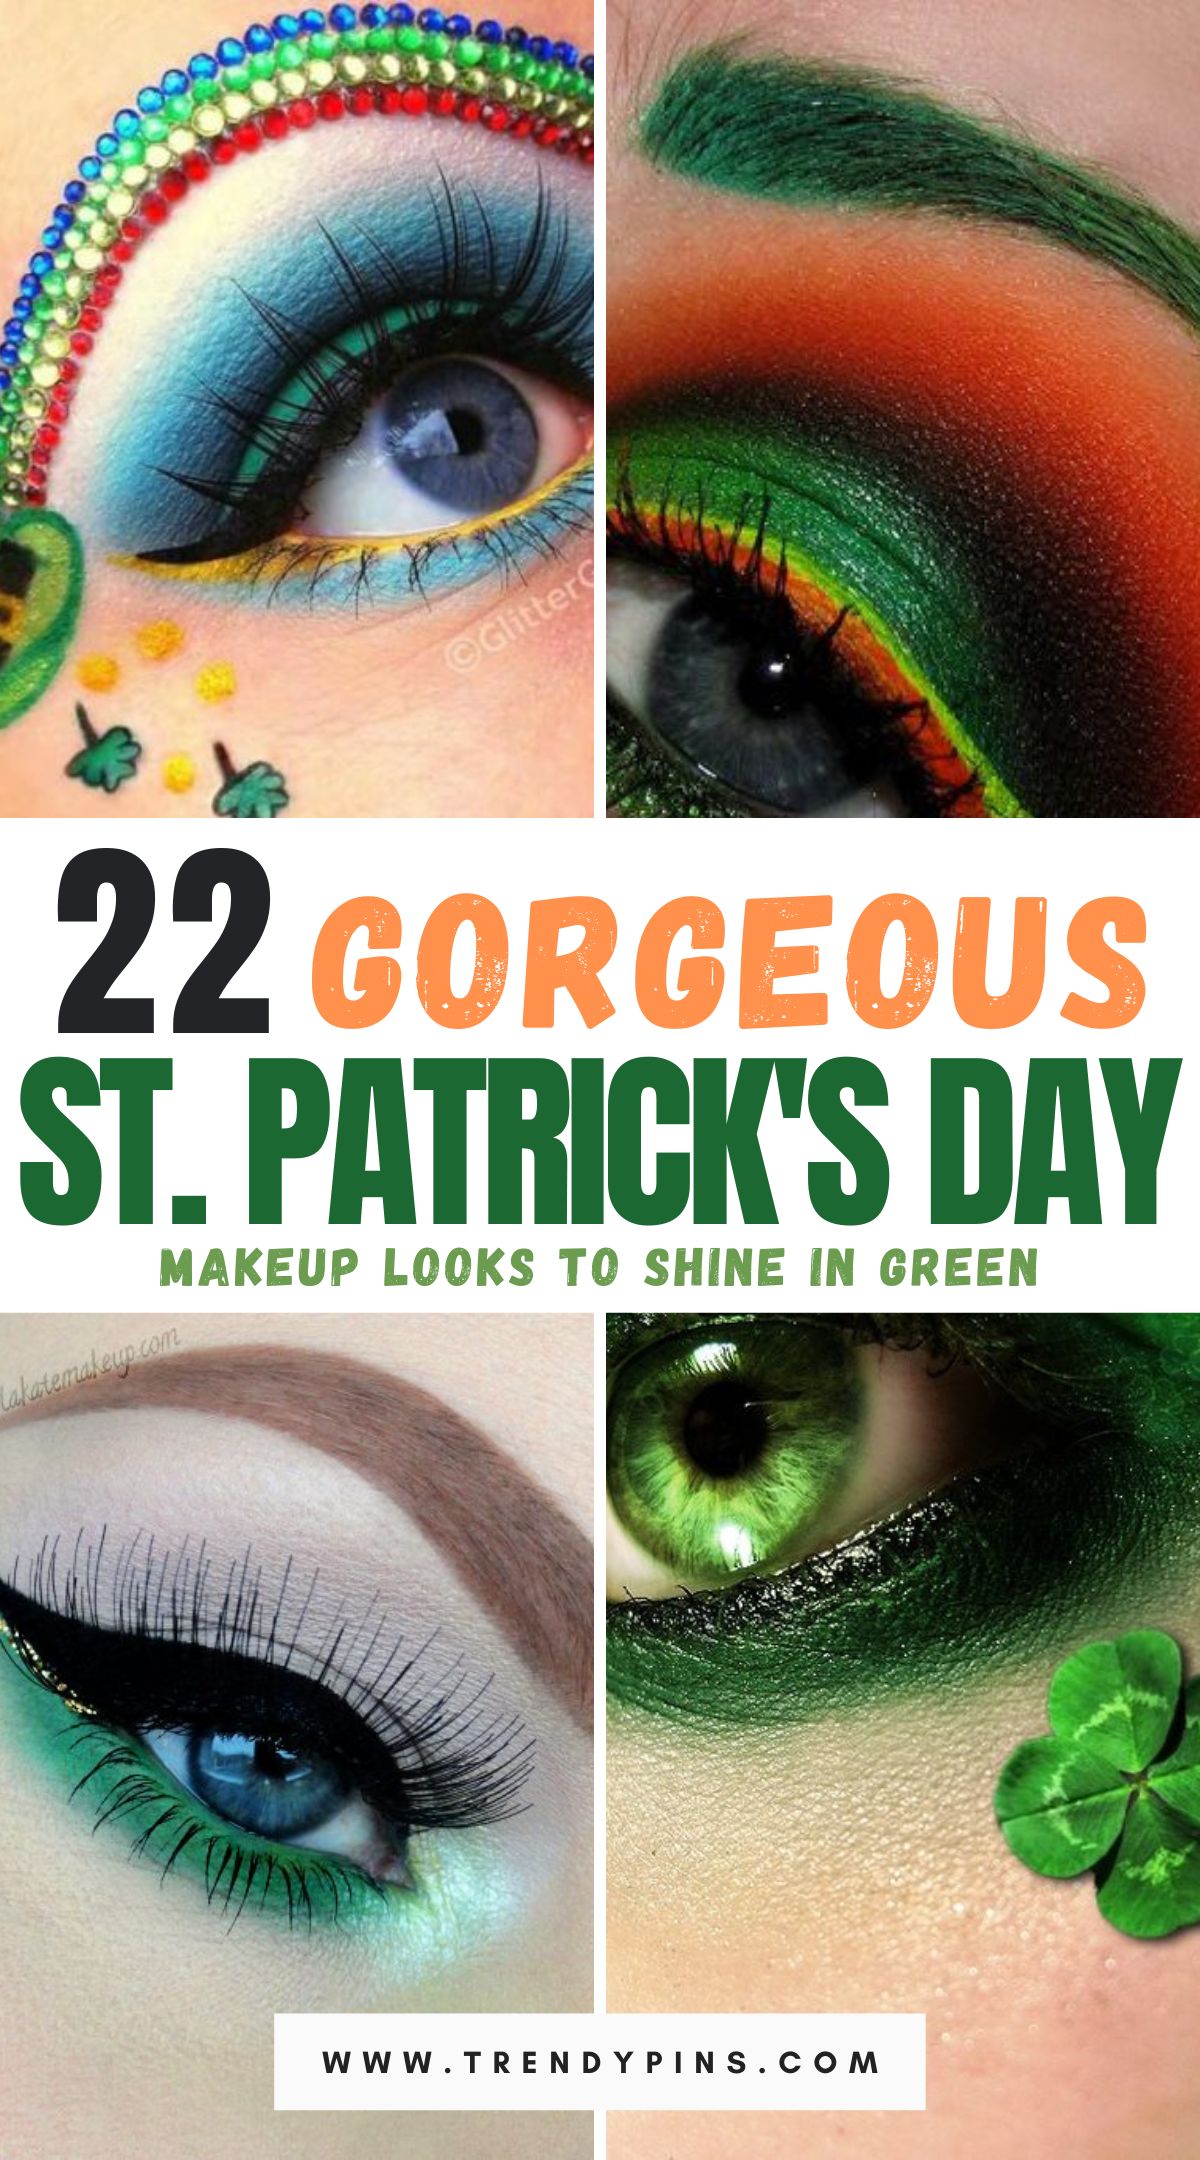 Shine in green with these 22 gorgeous St. Patrick's Day makeup looks. From subtle hints to bold statements, explore captivating beauty ideas that embrace the spirit of the holiday, ensuring you stand out with festive flair.